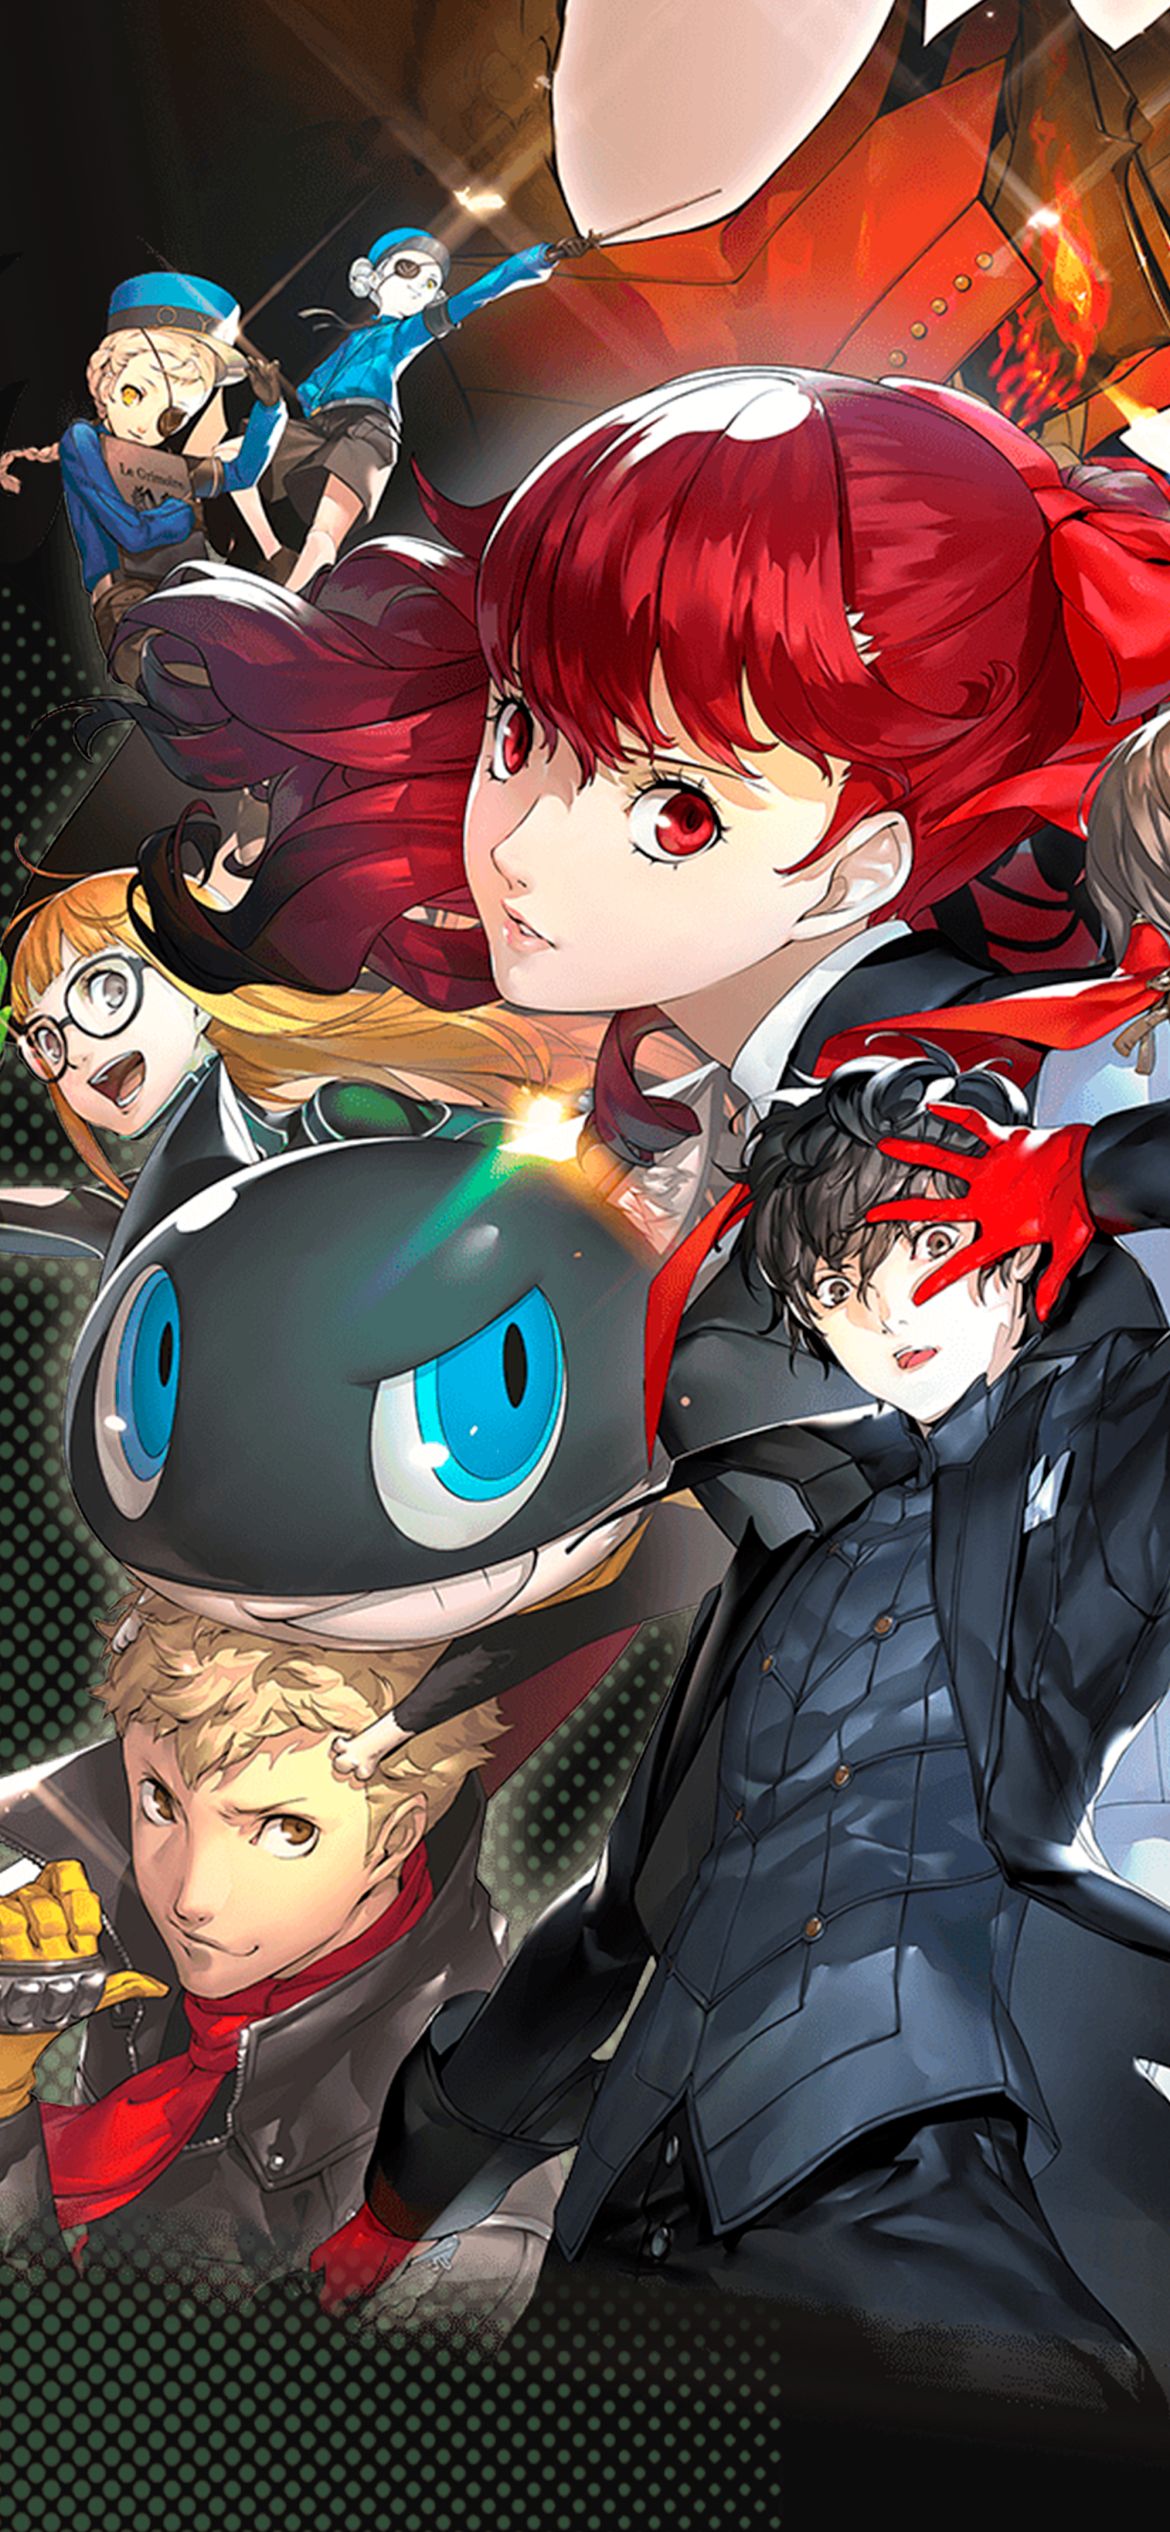 Persona 5 Phone Wallpapers  Top Free Persona 5 Phone Backgrounds   WallpaperAccess